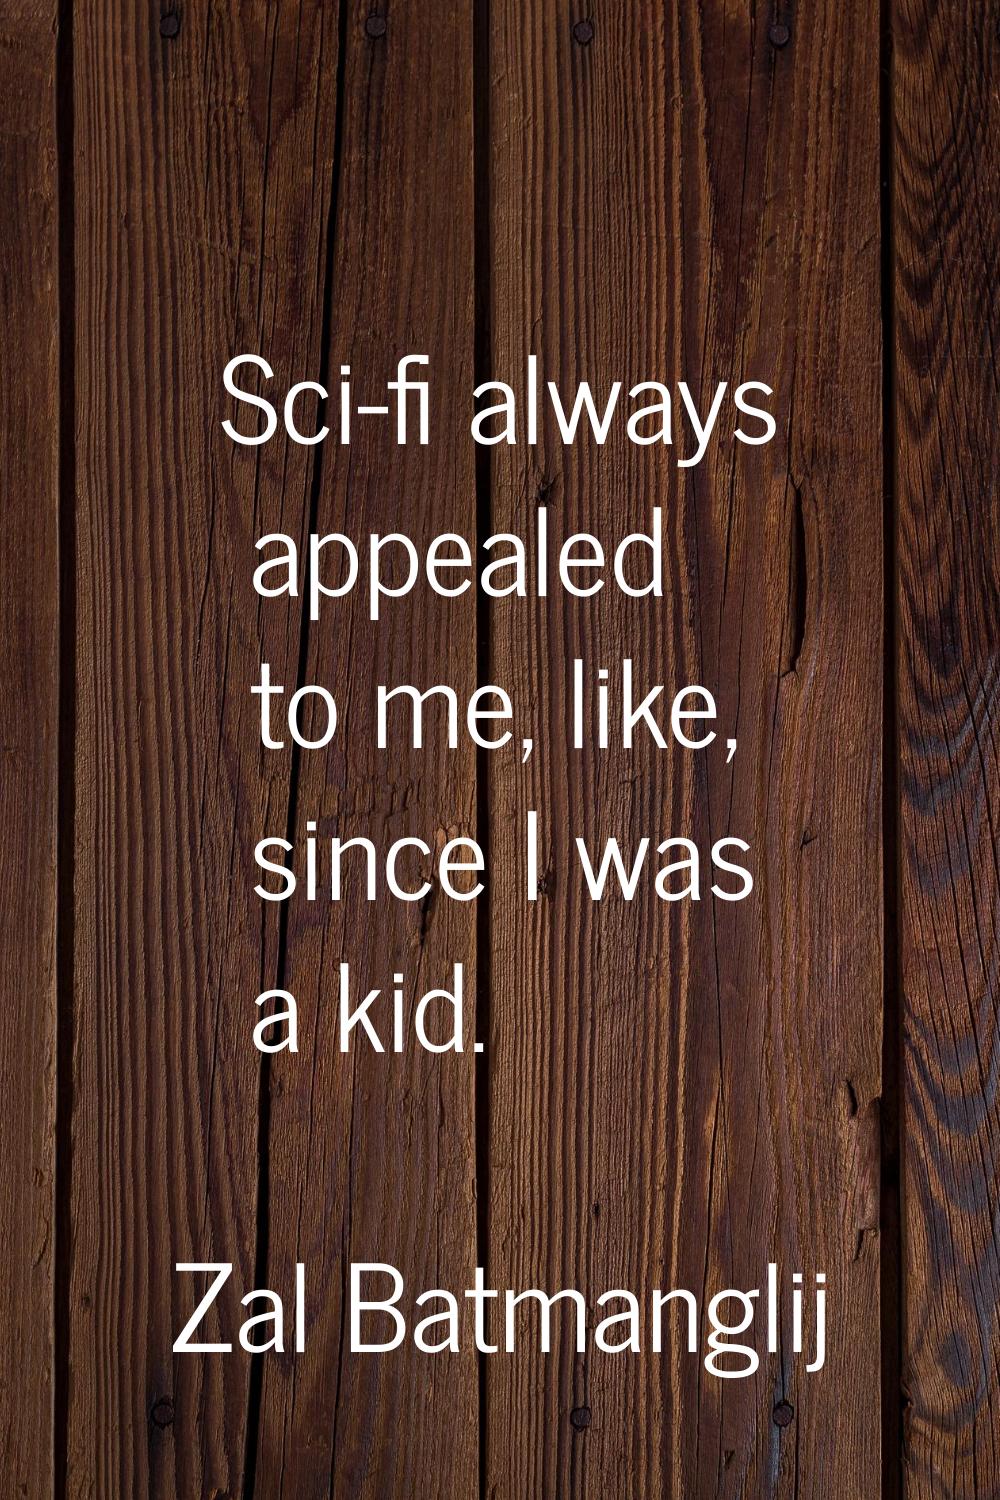 Sci-fi always appealed to me, like, since I was a kid.